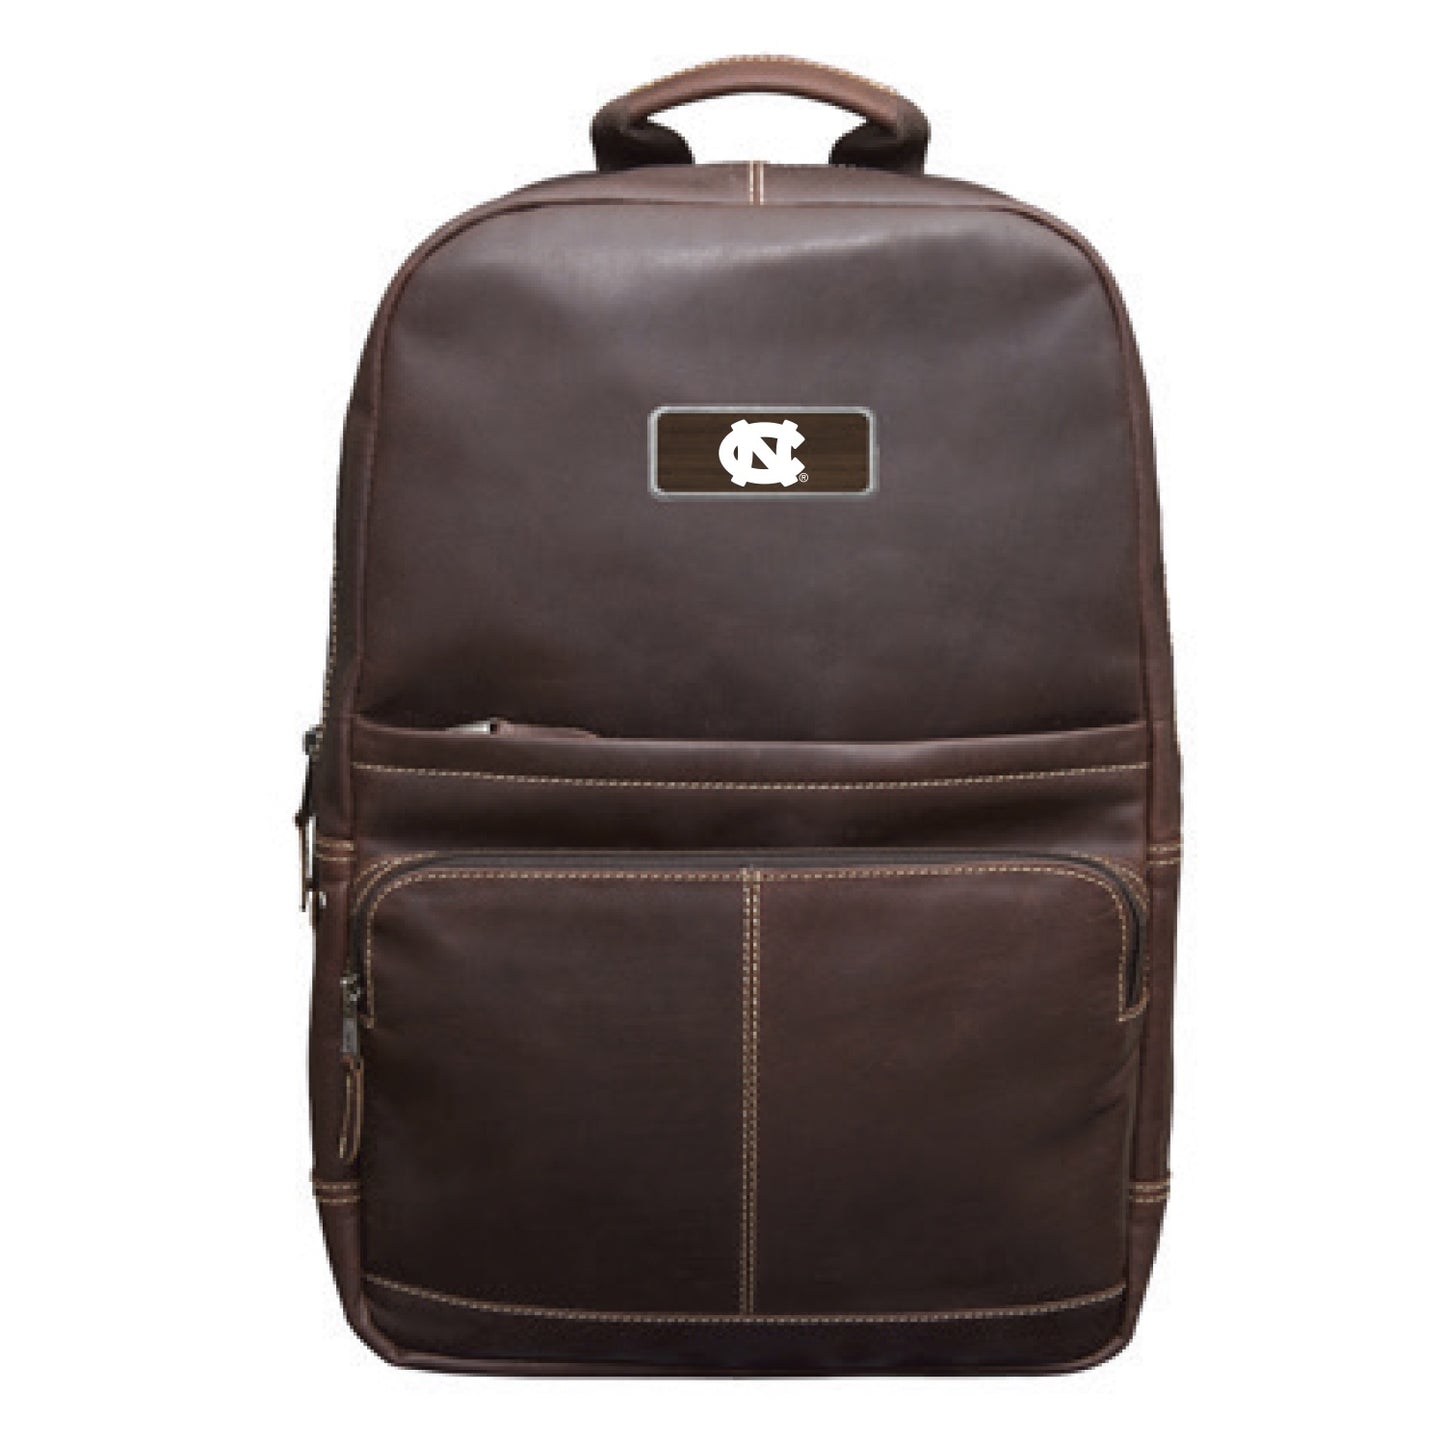 UNC Canyon Leather Backpack in Dark Brown